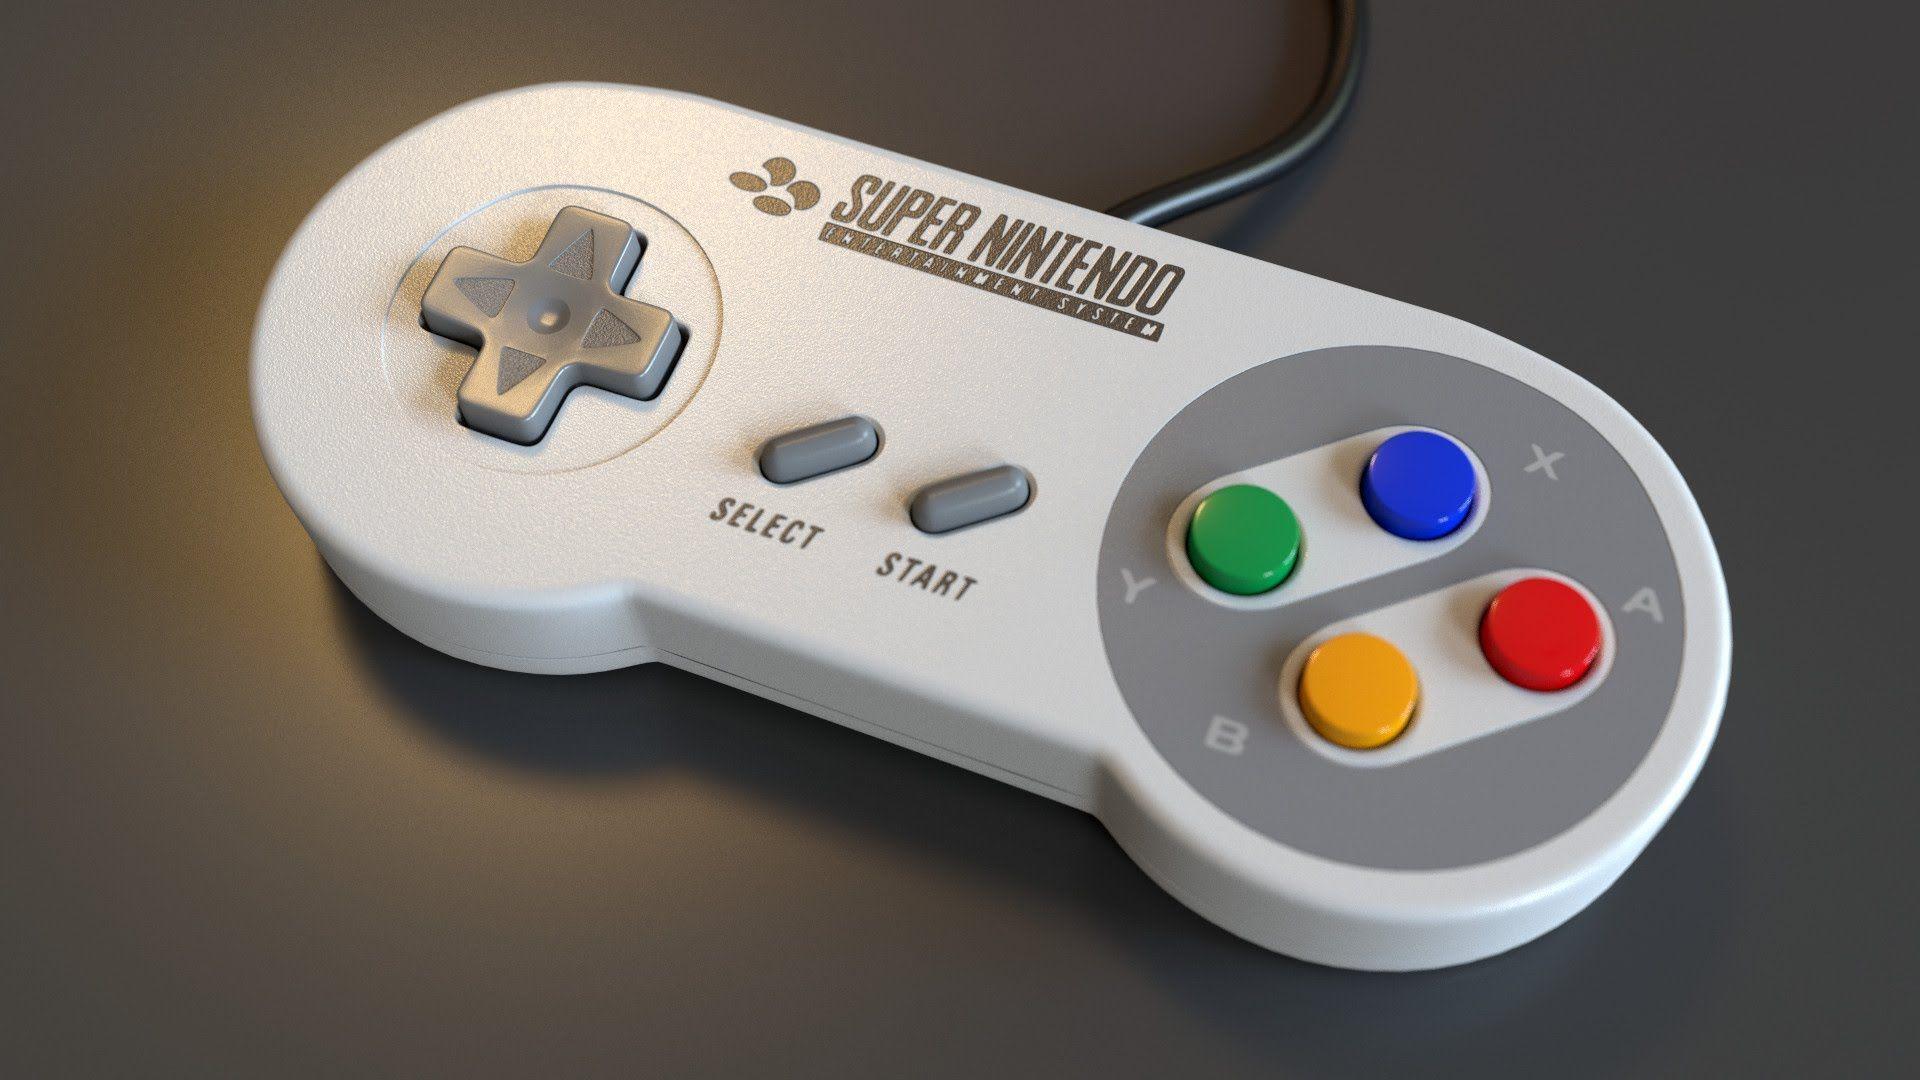 SNES Turns 25 Years Old Today. Super nintendo and Video games